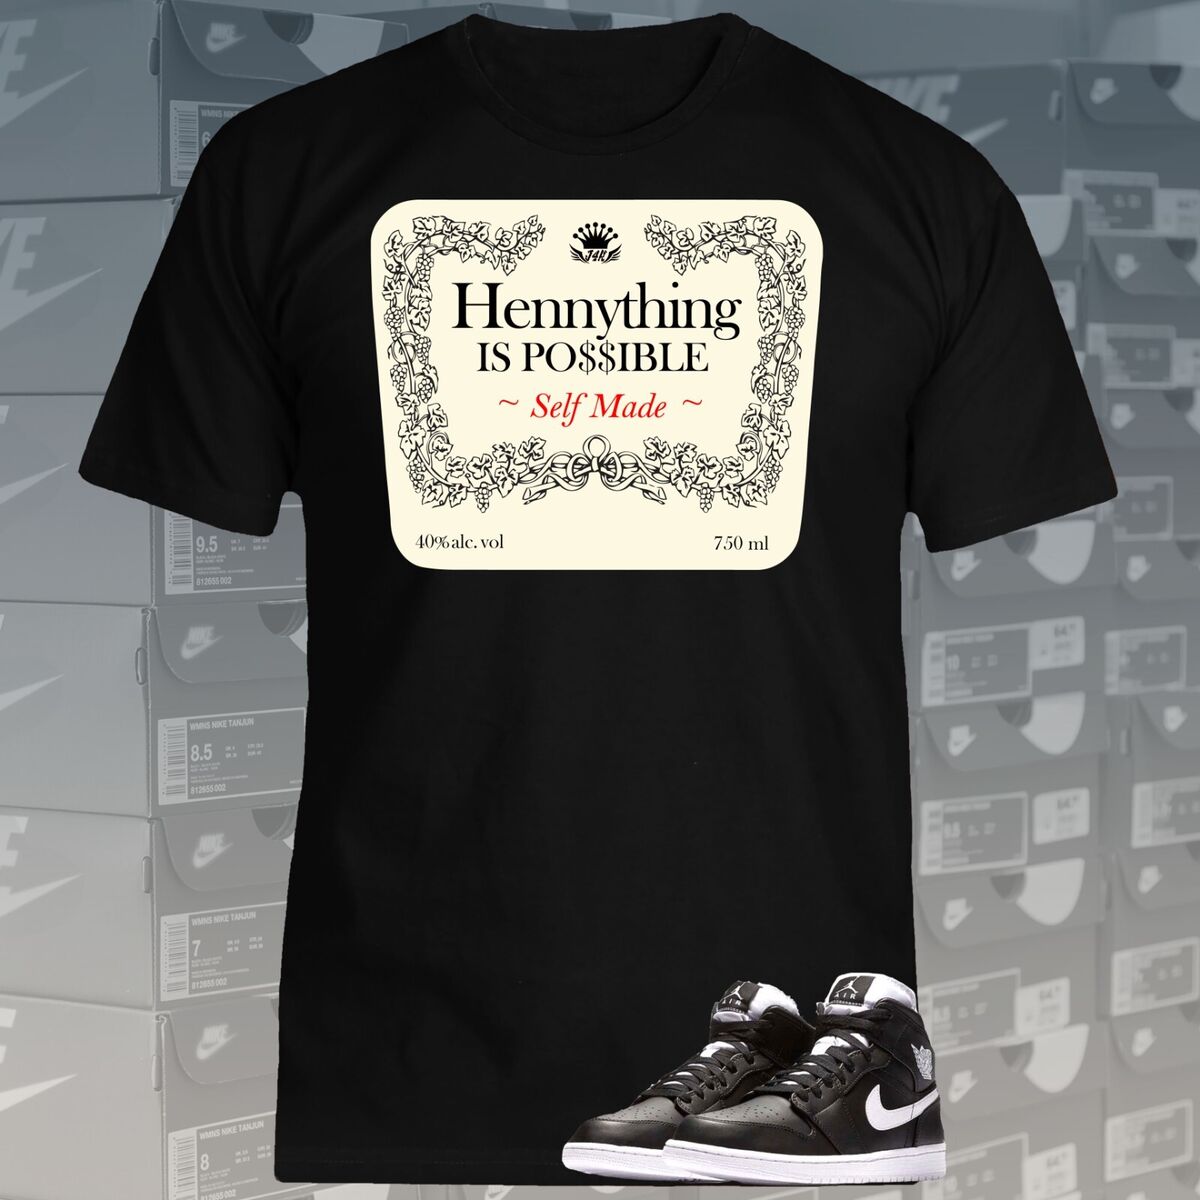 Nice Sneaker Tee Shirt to Match Air Jordan Shoes Unisex Sizing Hennything is Possible on eBay